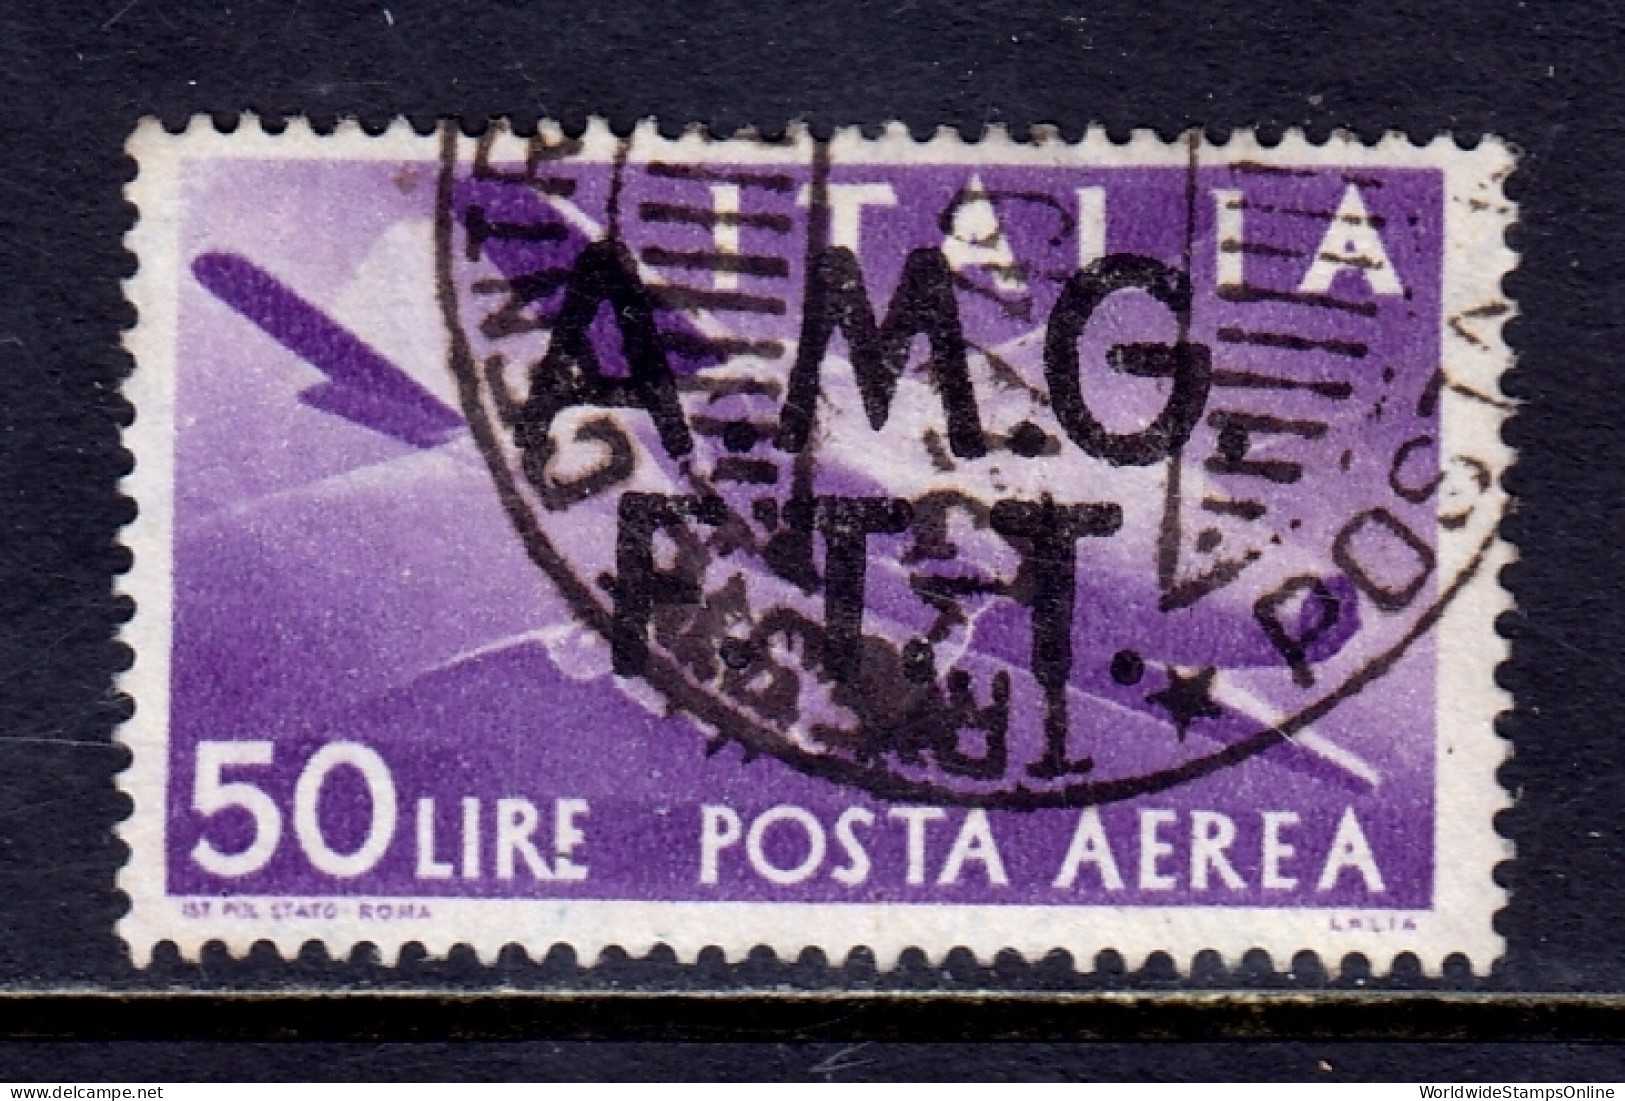 Italy (Trieste) - Scott #C6 - Used - A Bit Of Remnant Gum - SCV $25 - Correo Aéreo